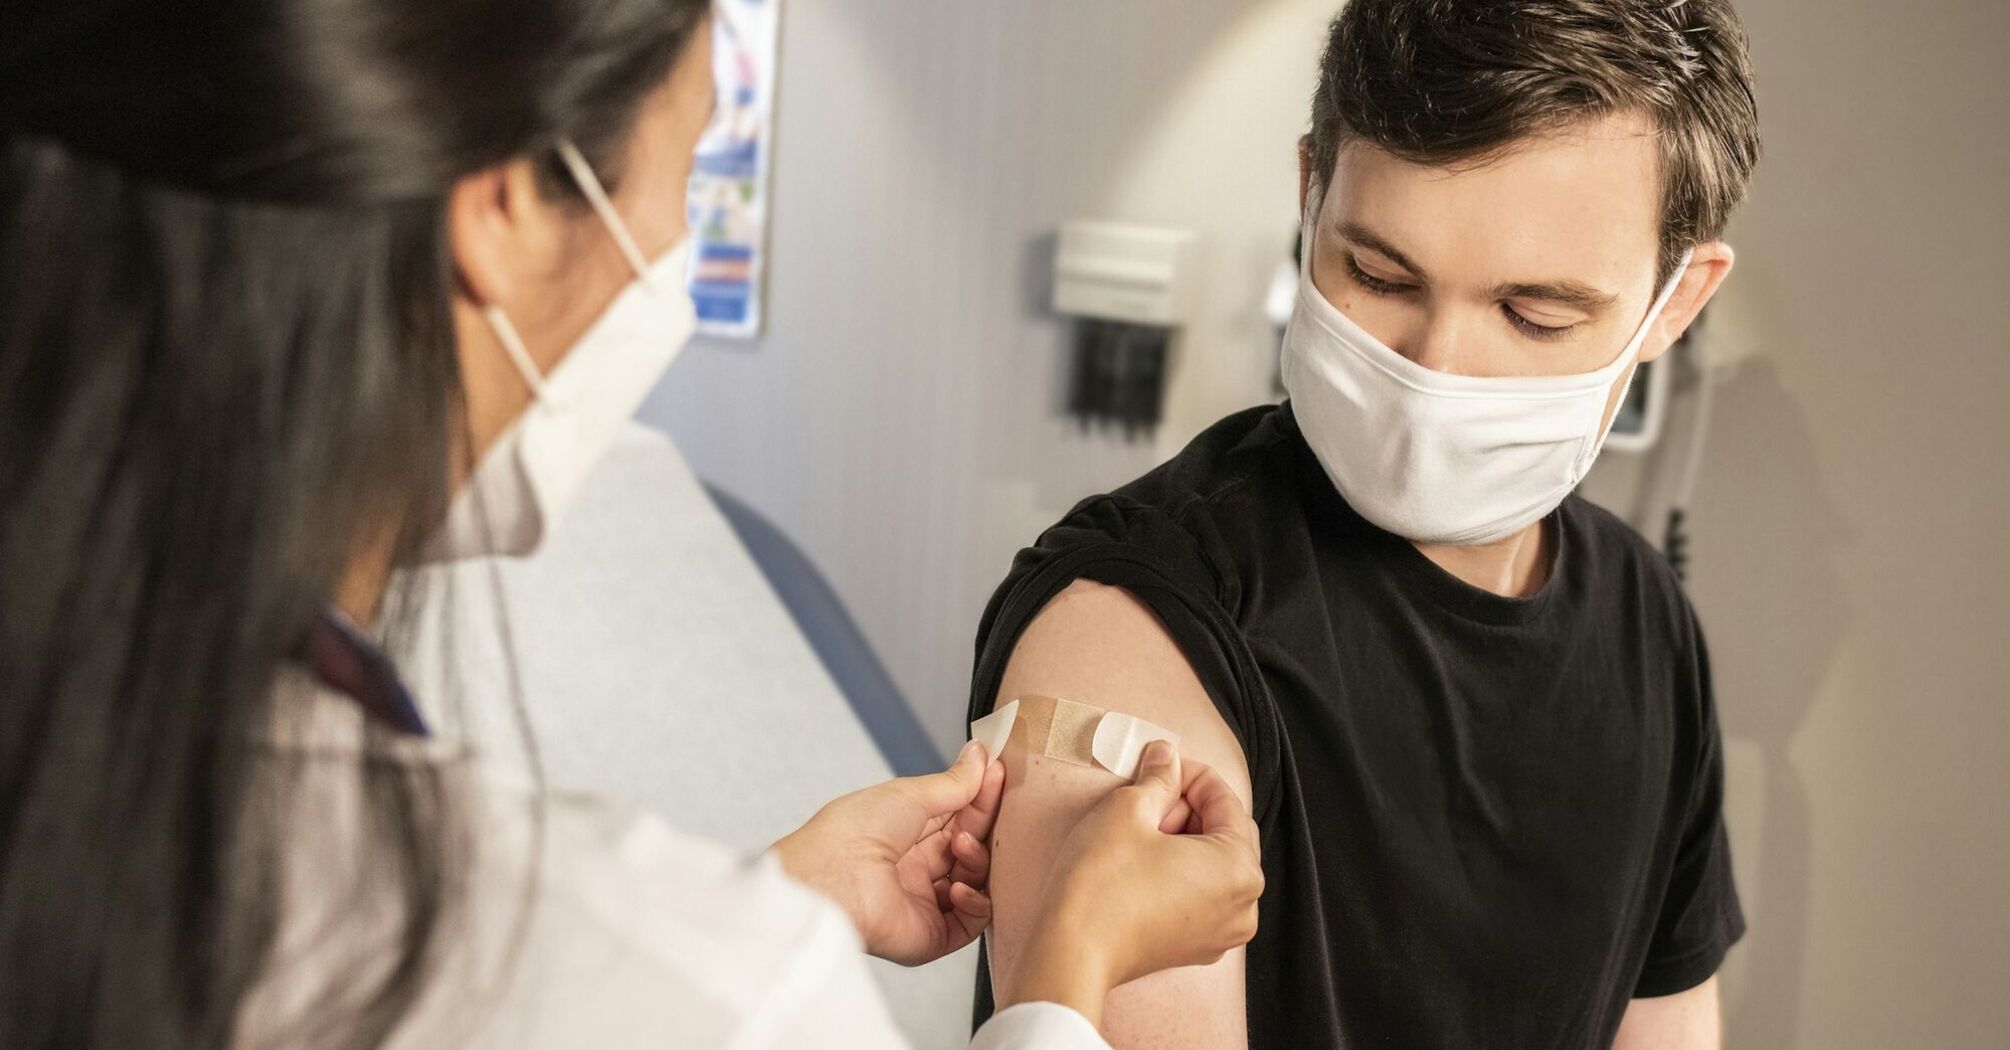 Healthcare professional applying bandage after vaccination